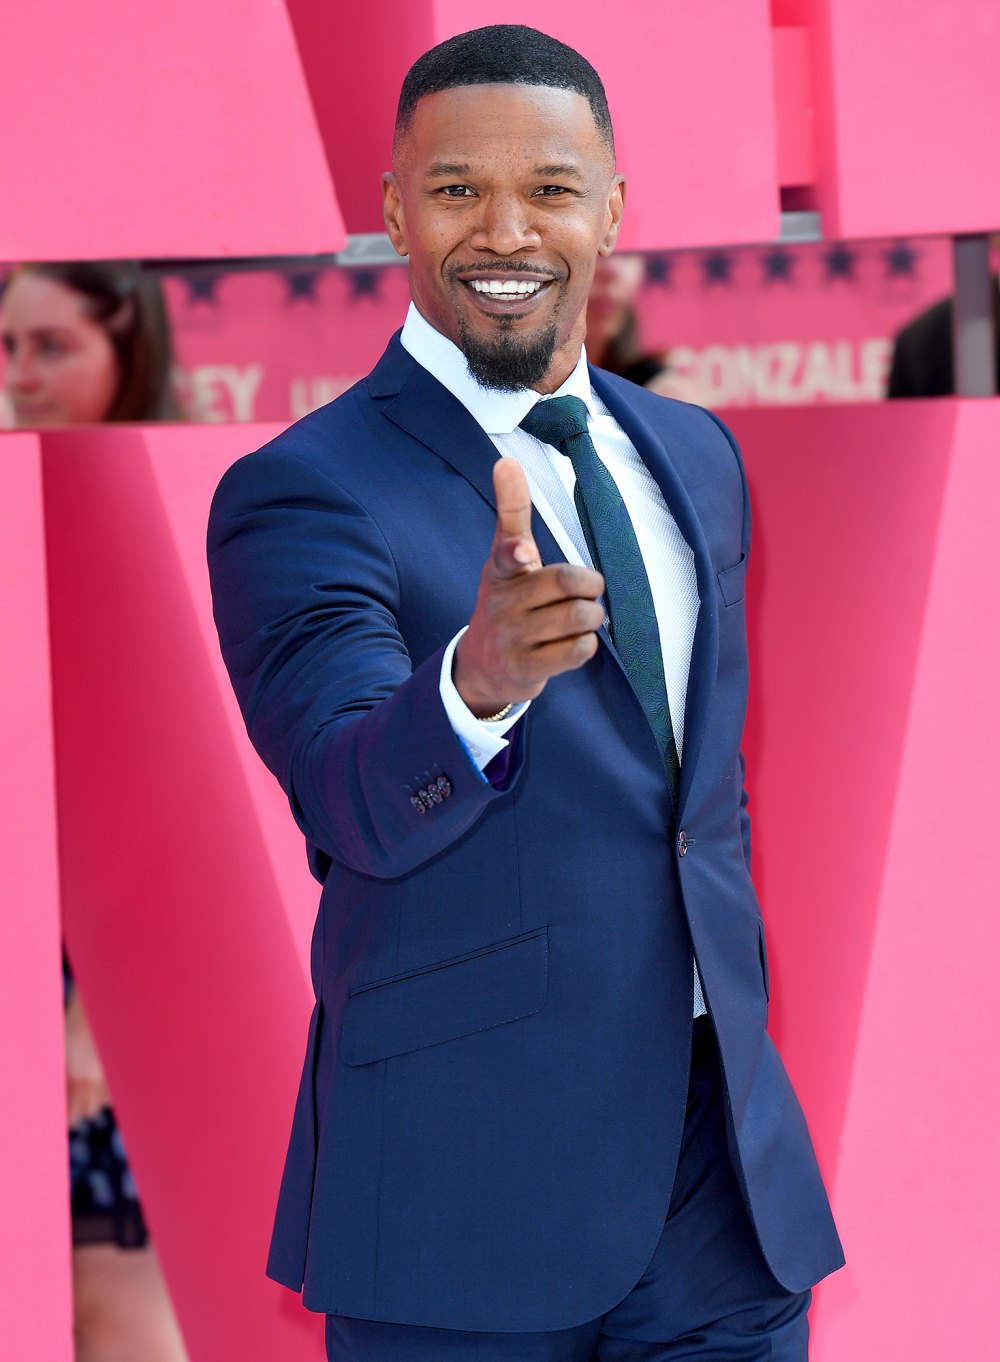 Jamie Foxx Is Starting to 'Feel Like Myself' Again Months After 'Unexpected Dark' Health Scare